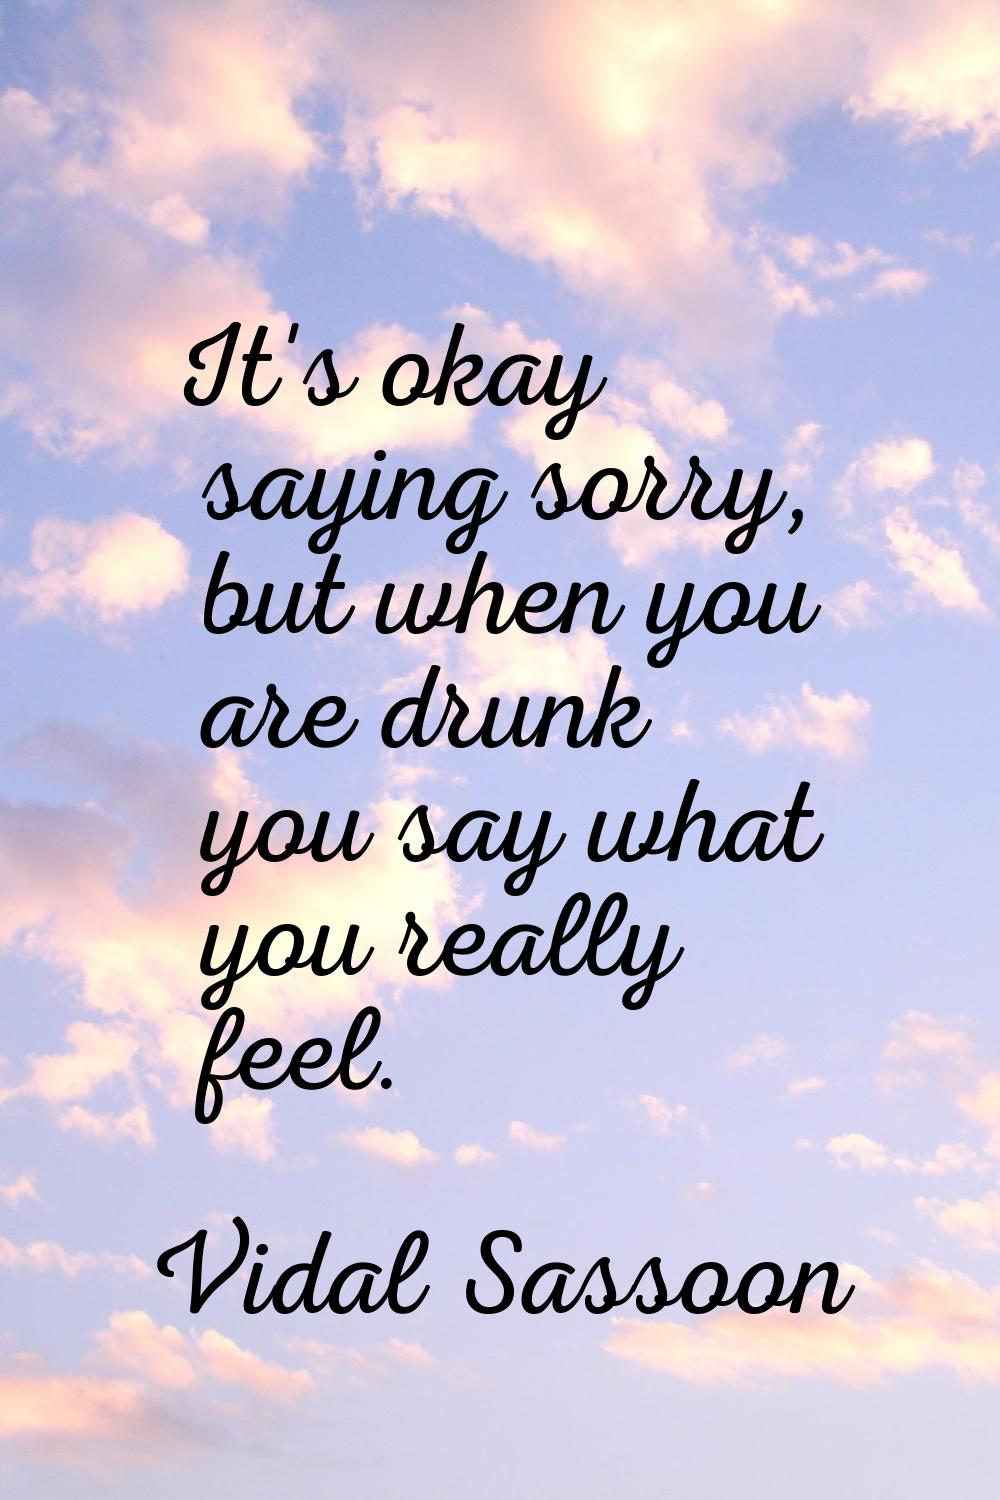 It's okay saying sorry, but when you are drunk you say what you really feel.